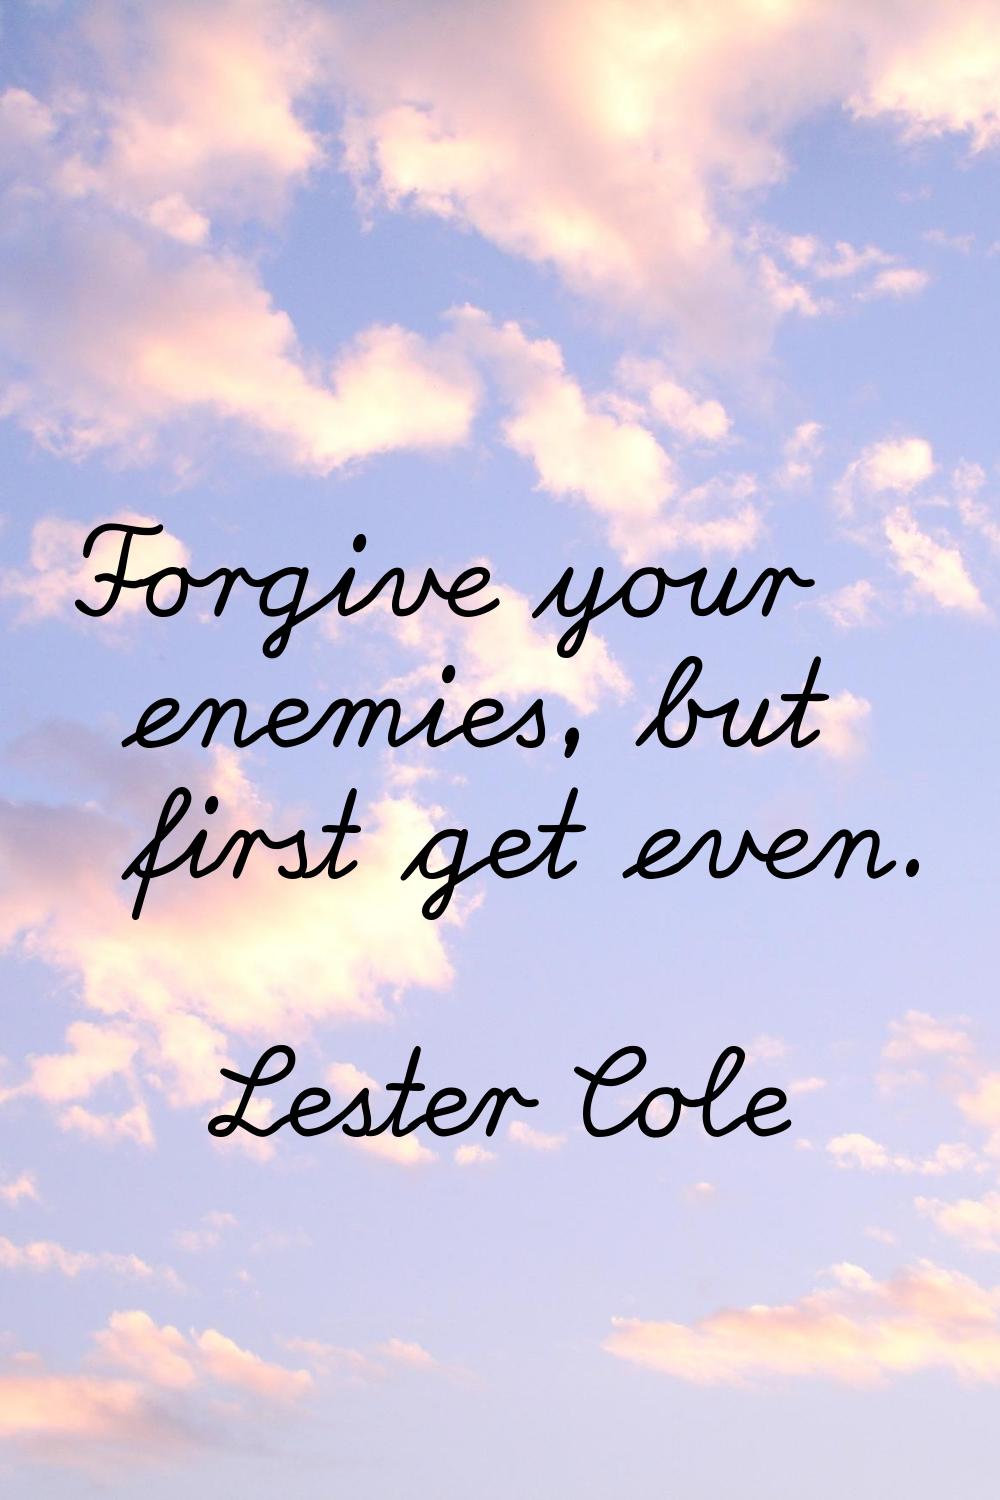 Forgive your enemies, but first get even.